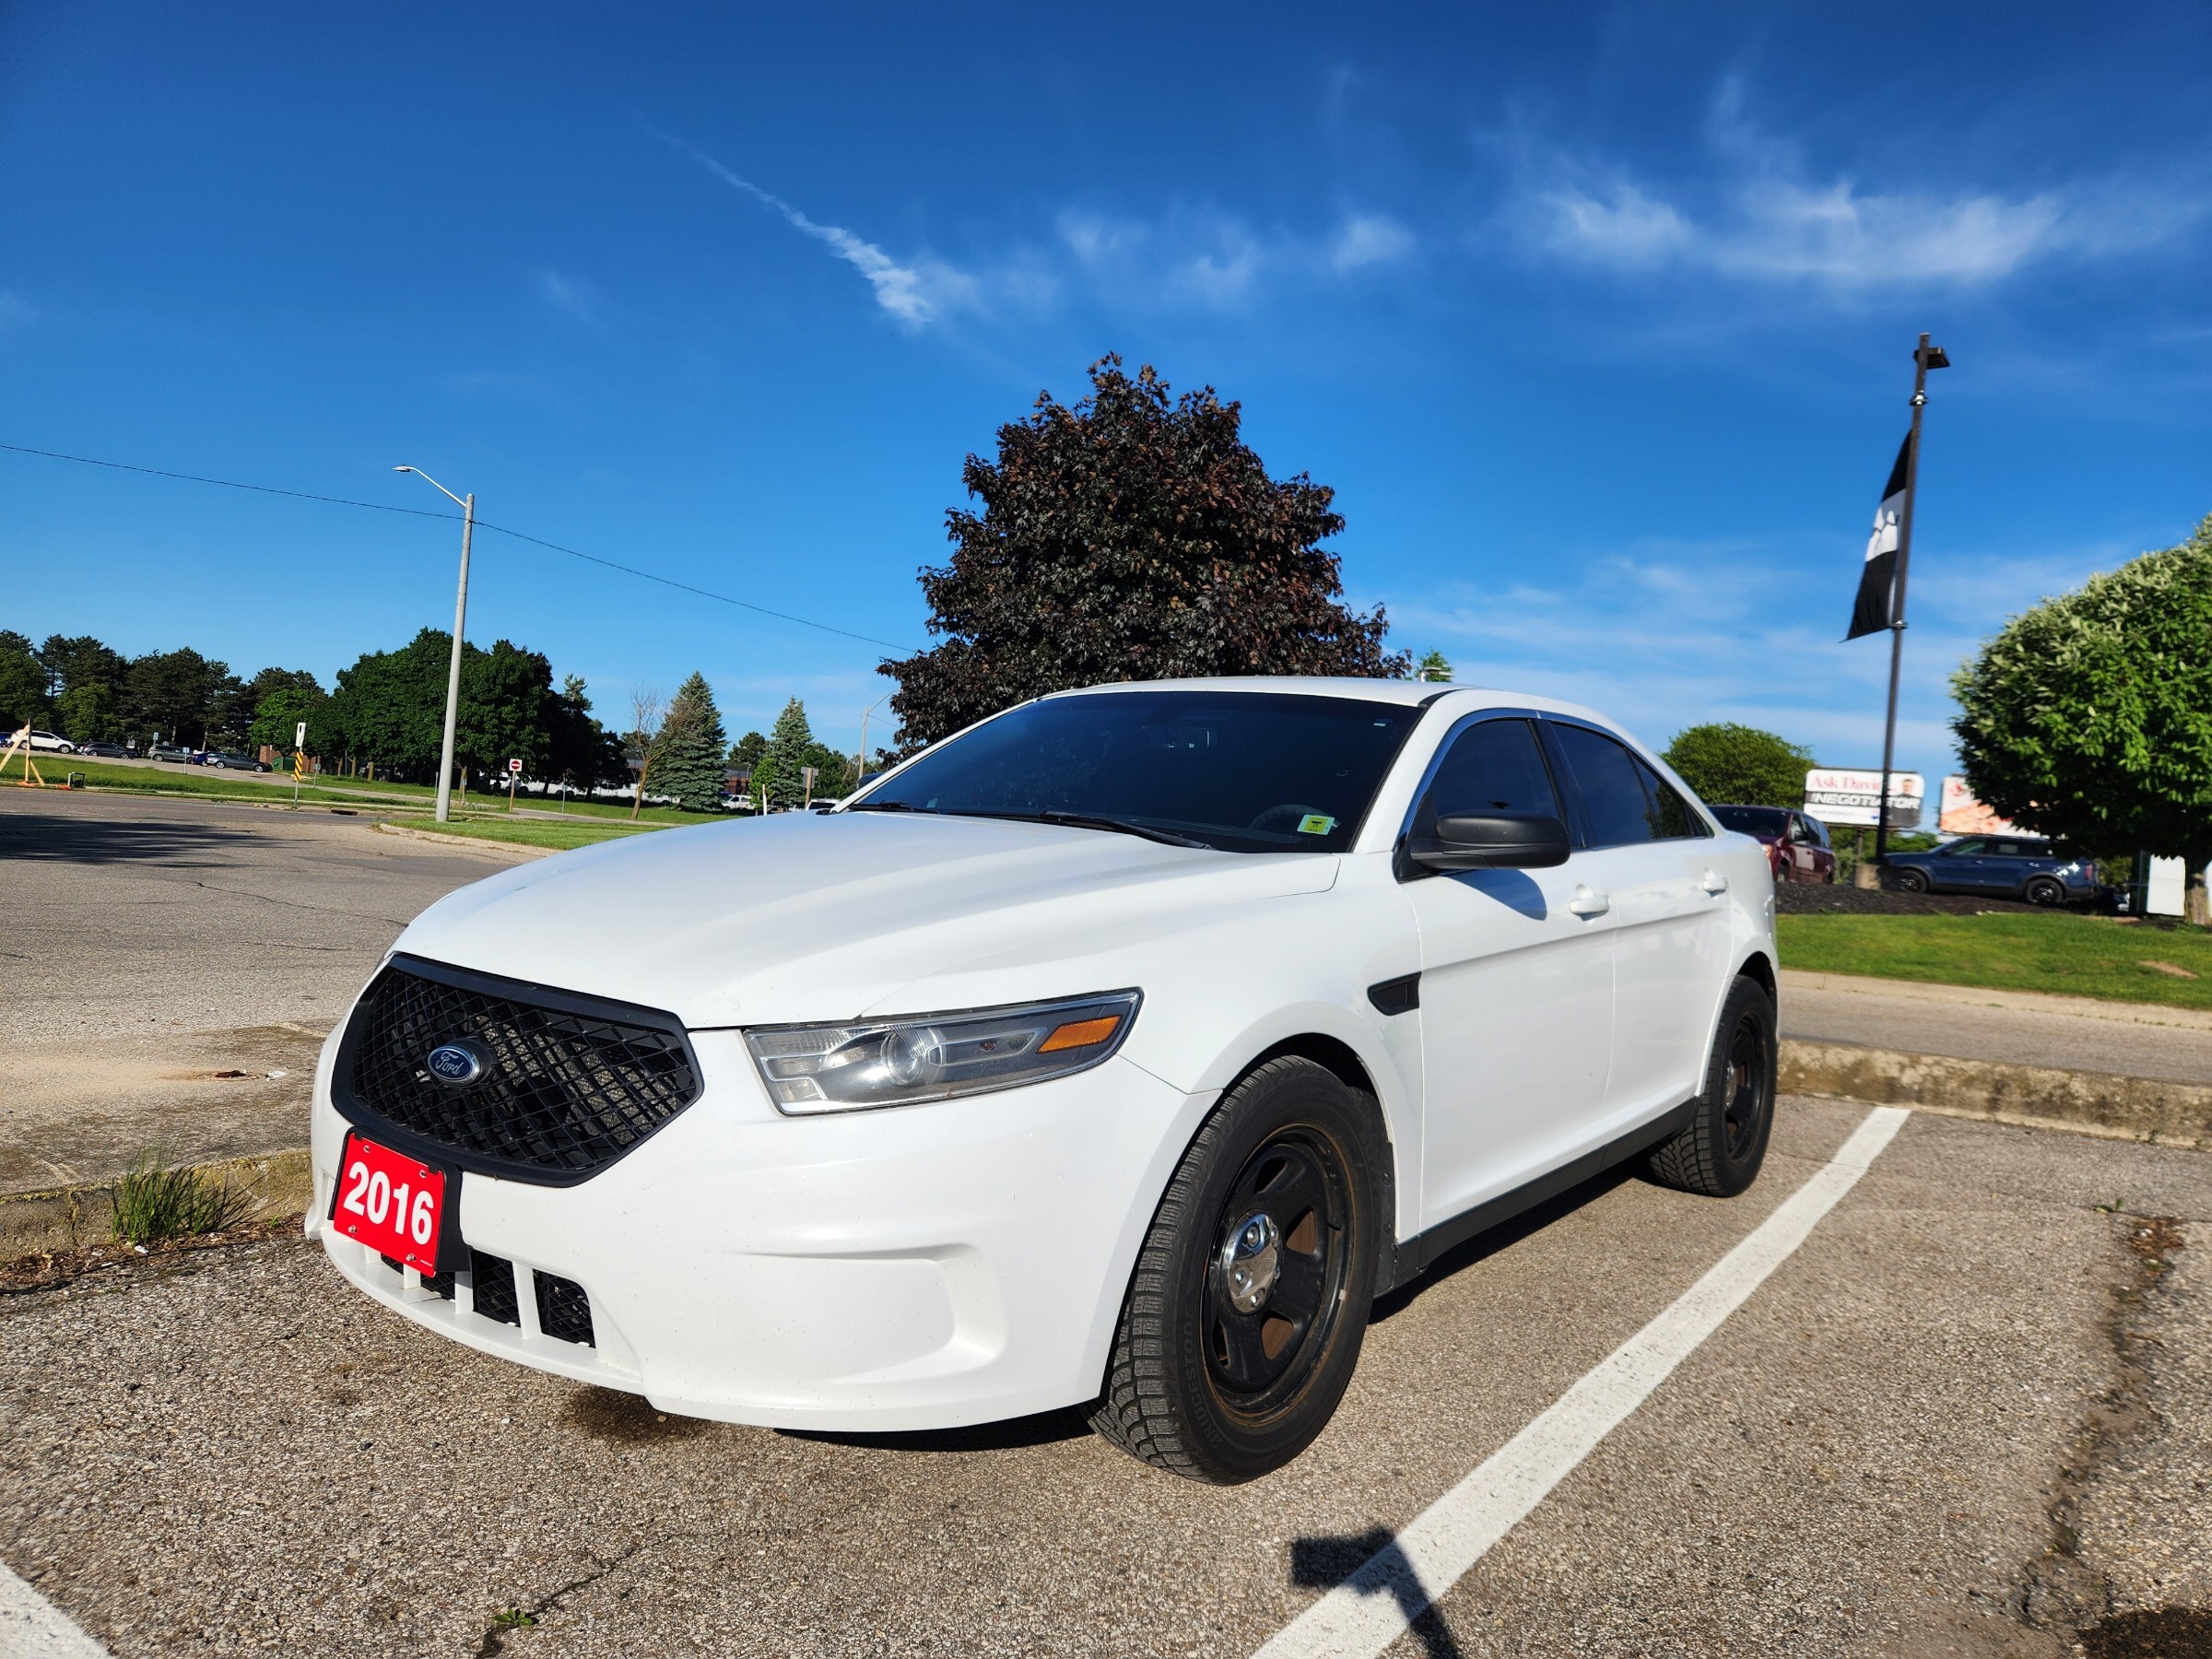 2016 Ford Police Interceptor Sedan AS-IS | YOU CERTIFY YOU SAVE